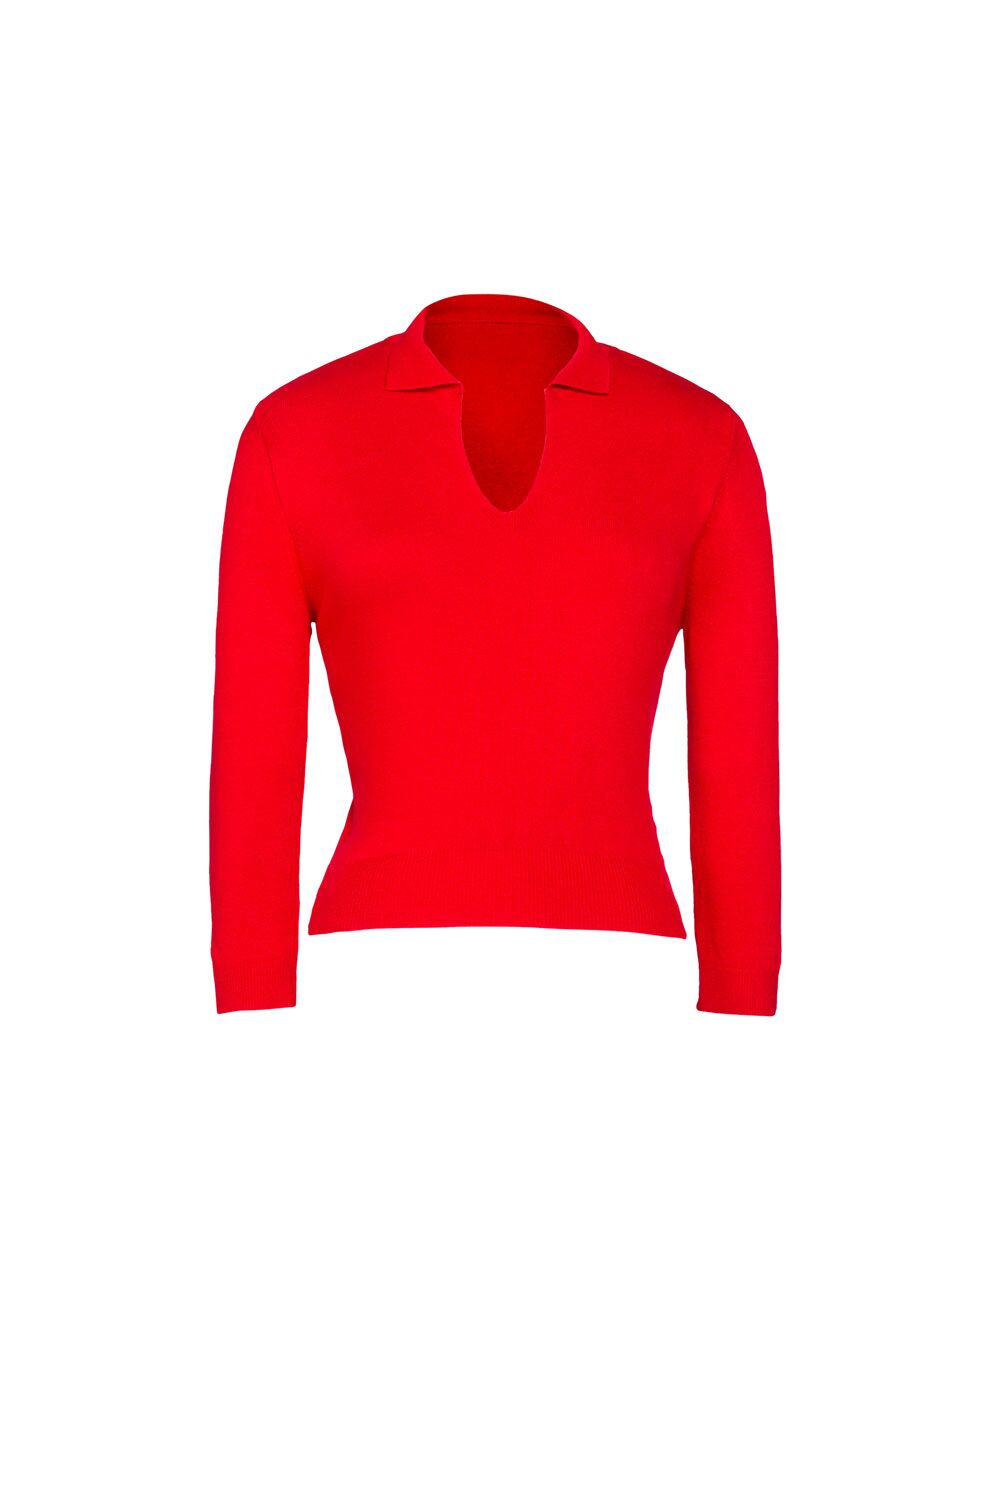 Pinup Couture Vintage Sweater Girl Pullover in Red